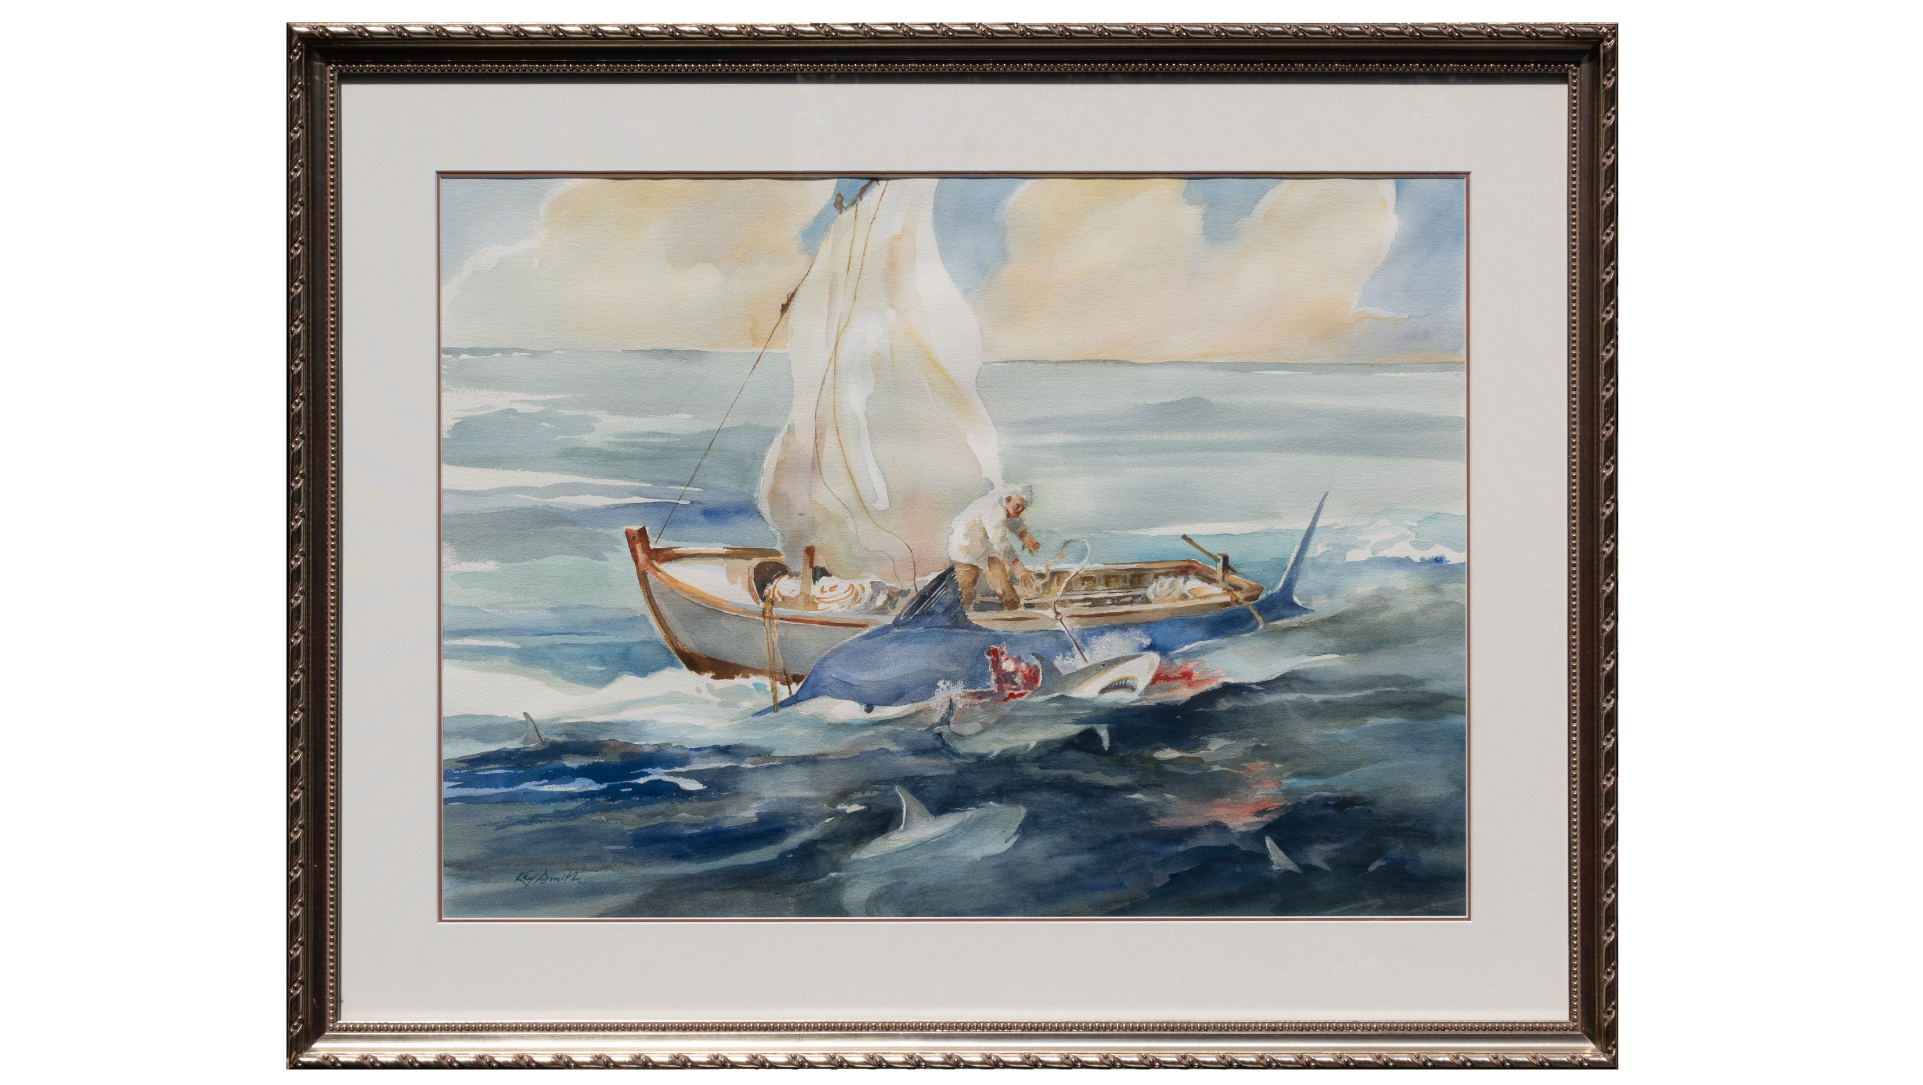 Old Man Fighting the Sharks Old Man and the Sharks  30h x 37w Framed  $4,500  Old Man and the Sea